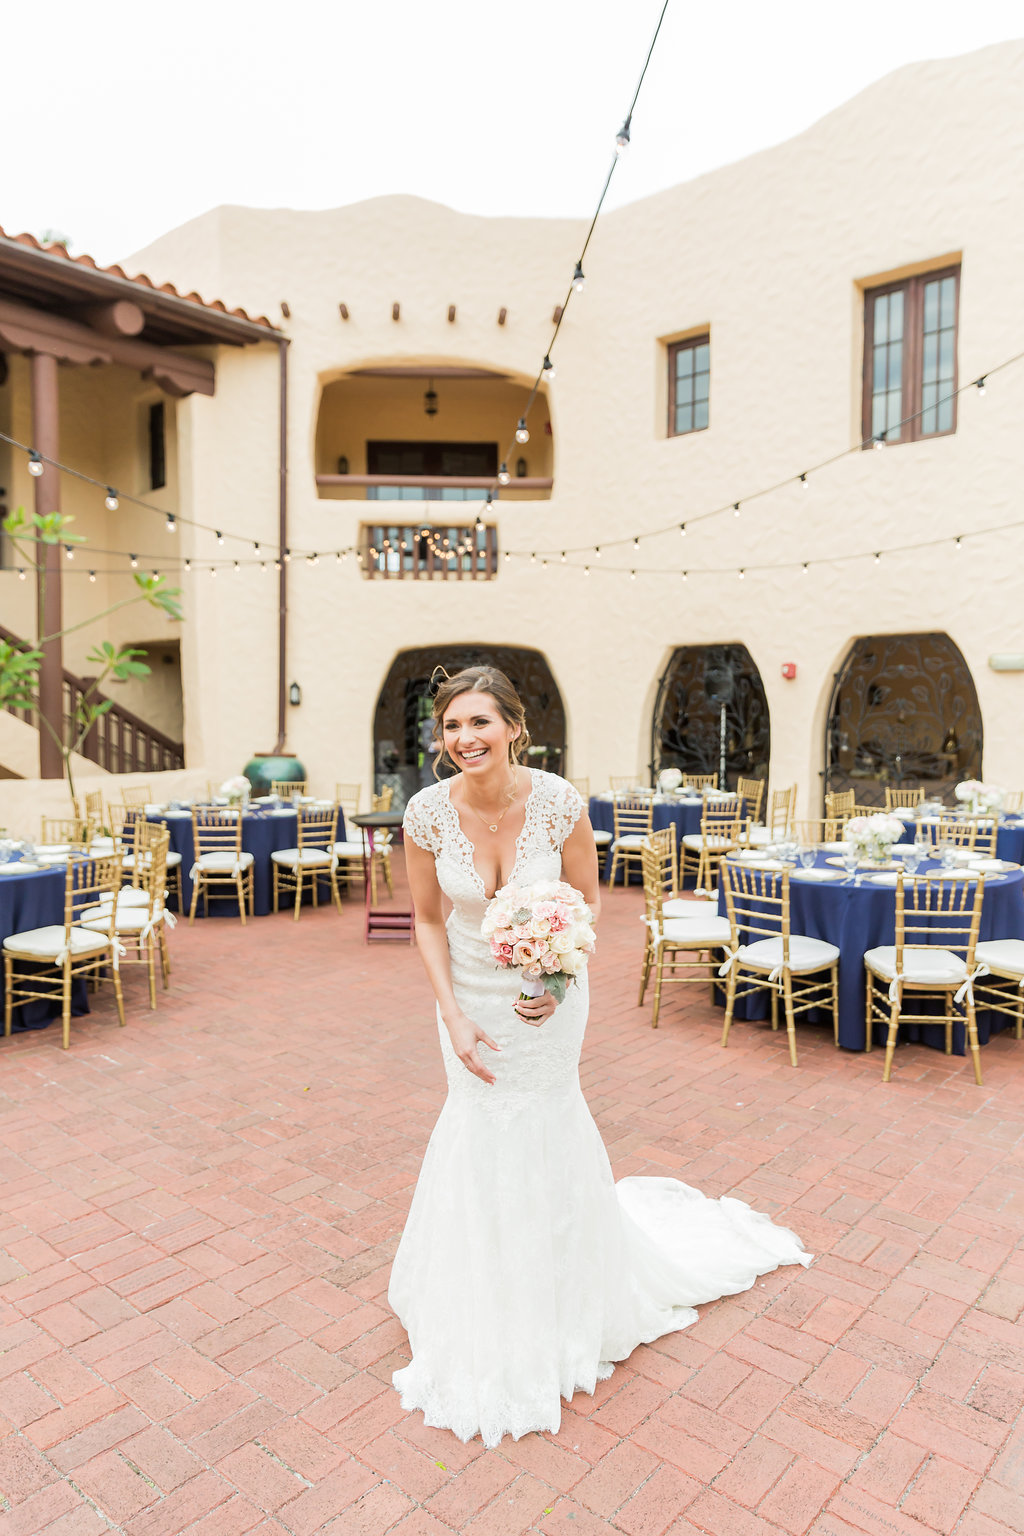 Oh My Occasions, the South Florida wedding planner designed this Curtiss Mansion wedding. The bride's reaction to her reception reveal shows her excitement and satisfaction